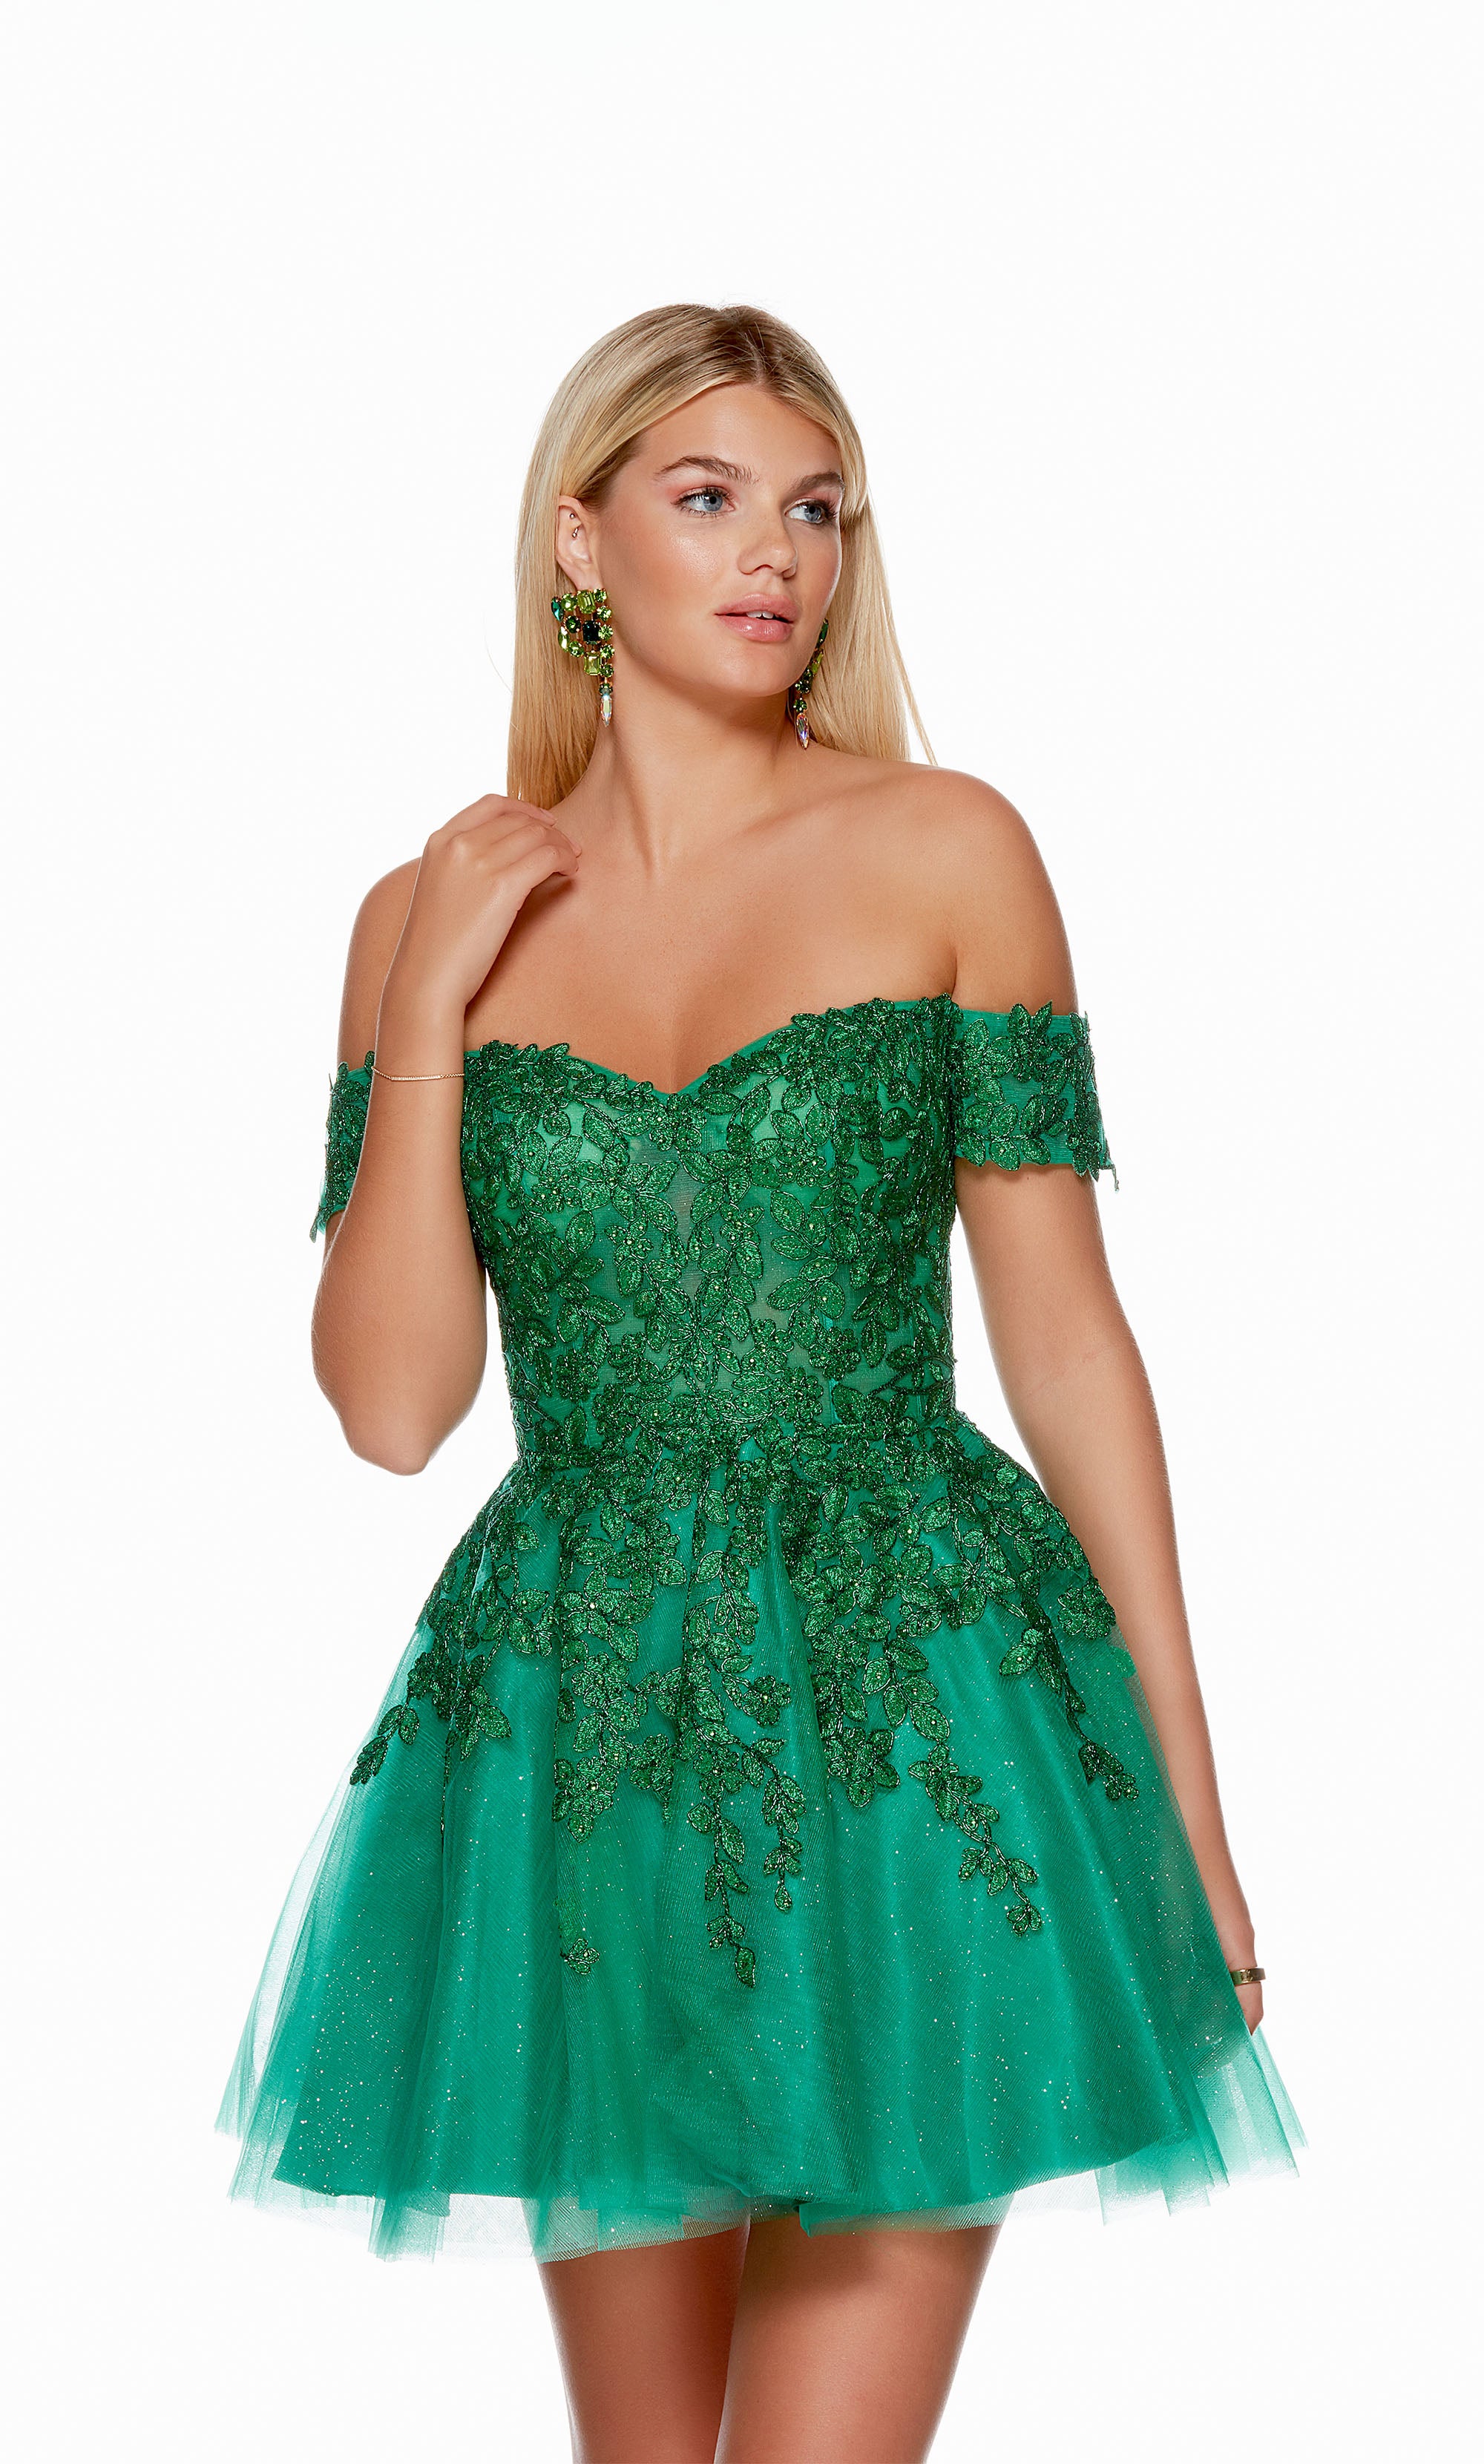 A playful emerald green short party dress featuring an off the shoulder neckline, a sheer bodice adorned with floral lace appliques, and a glitter-tulle skirt.